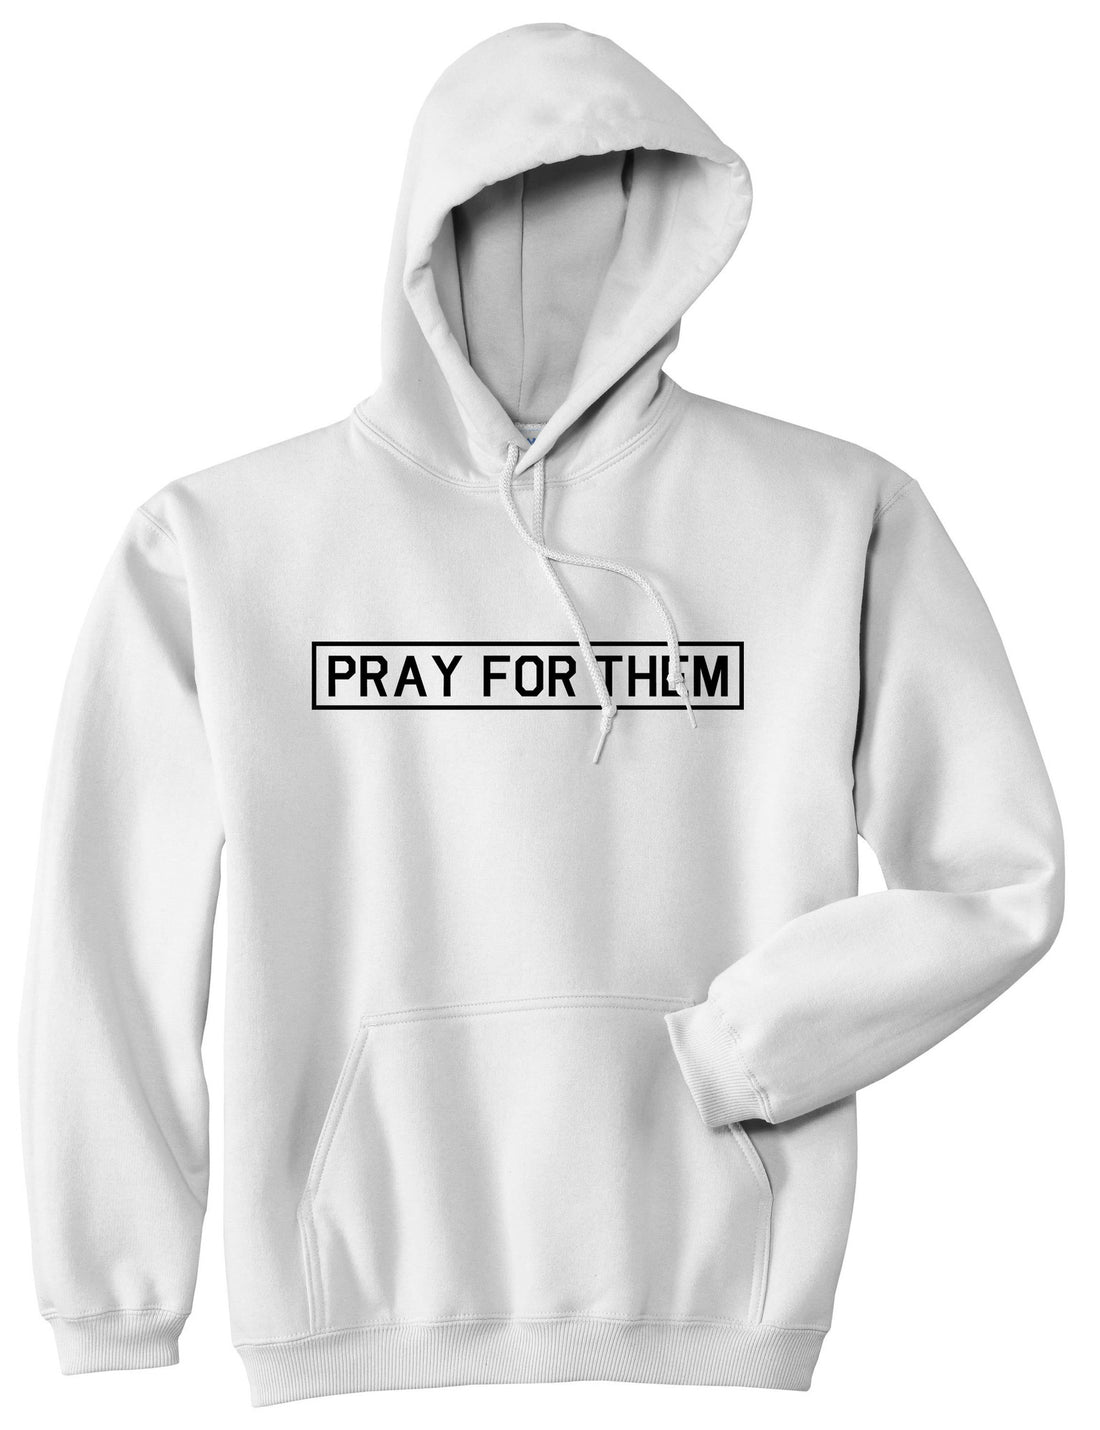 Pray For Them Fall15 Pullover Hoodie Hoody in White by Kings Of NY